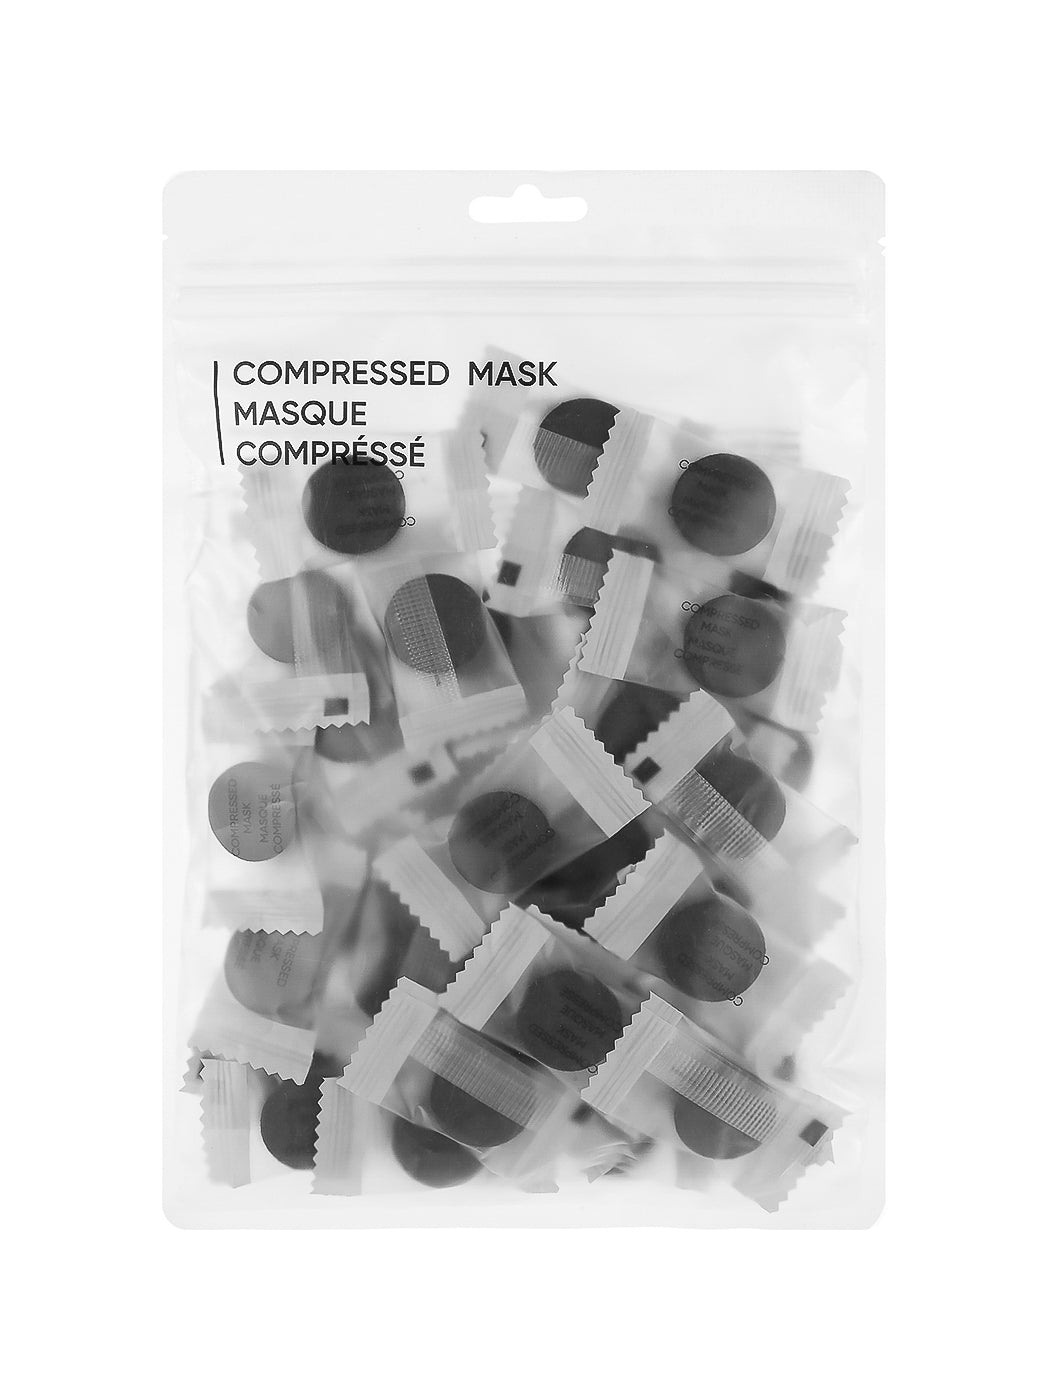 MINISO BAMBOO CHARCOAL COMPRESSED MASK 0200050491 COMPRESSED FACIAL MASK/ SHEET MASK